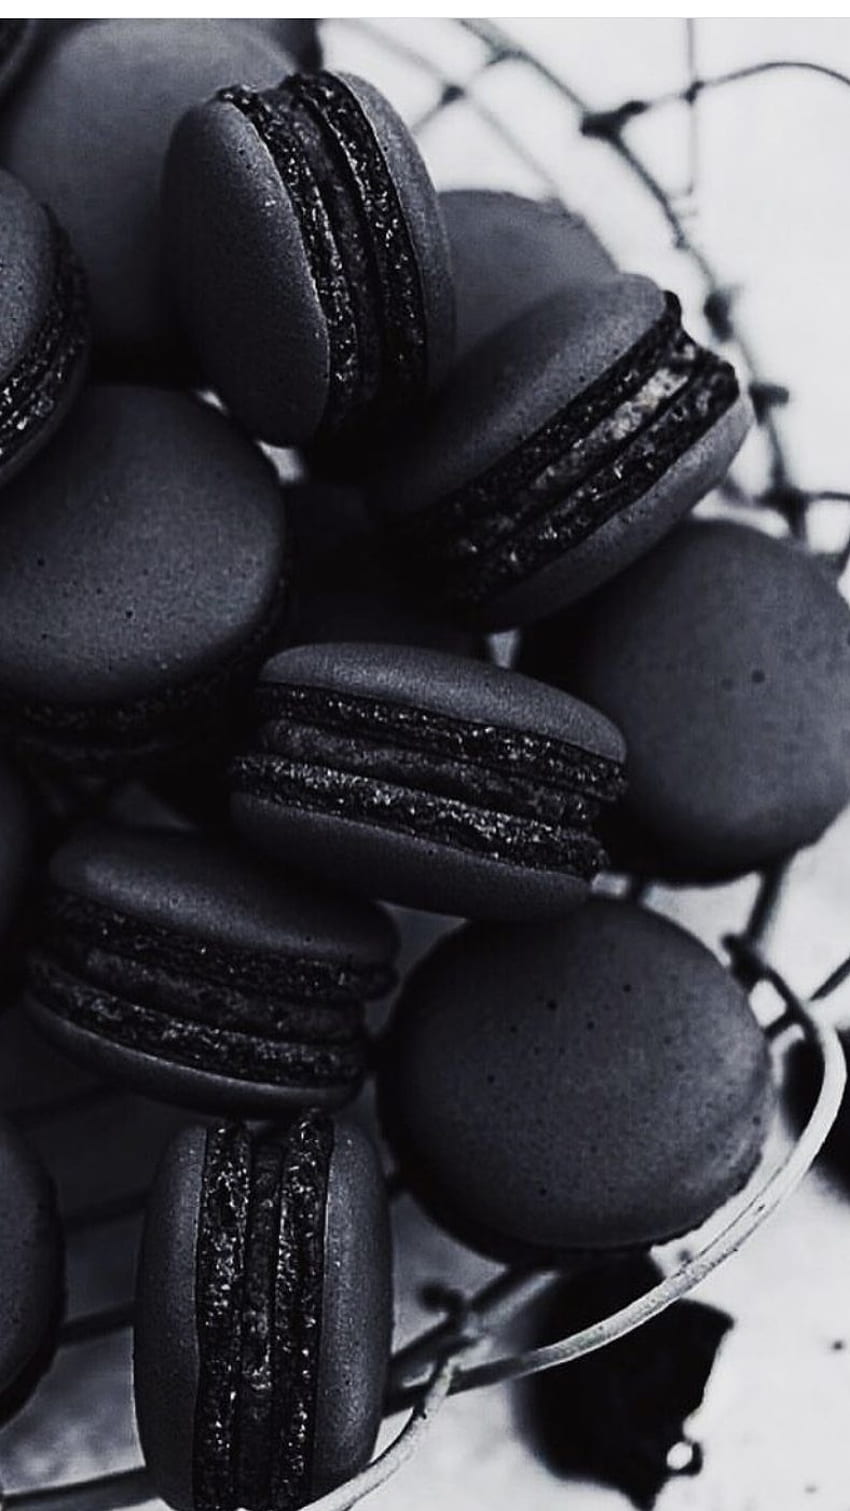 A plate of black macarons with a black and white background - Oreo